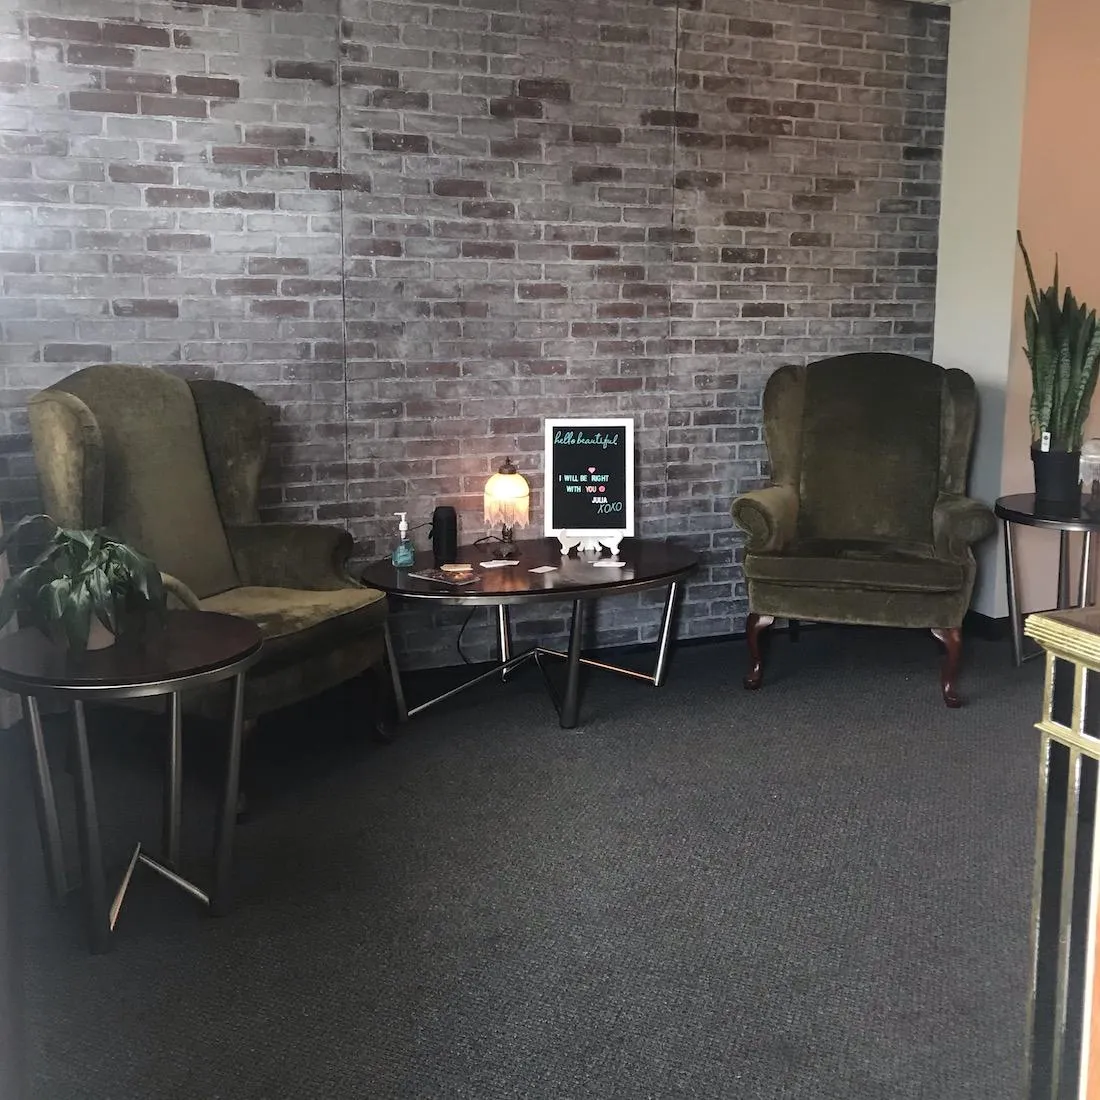 Prime Microblading & Beauty Lounge Area